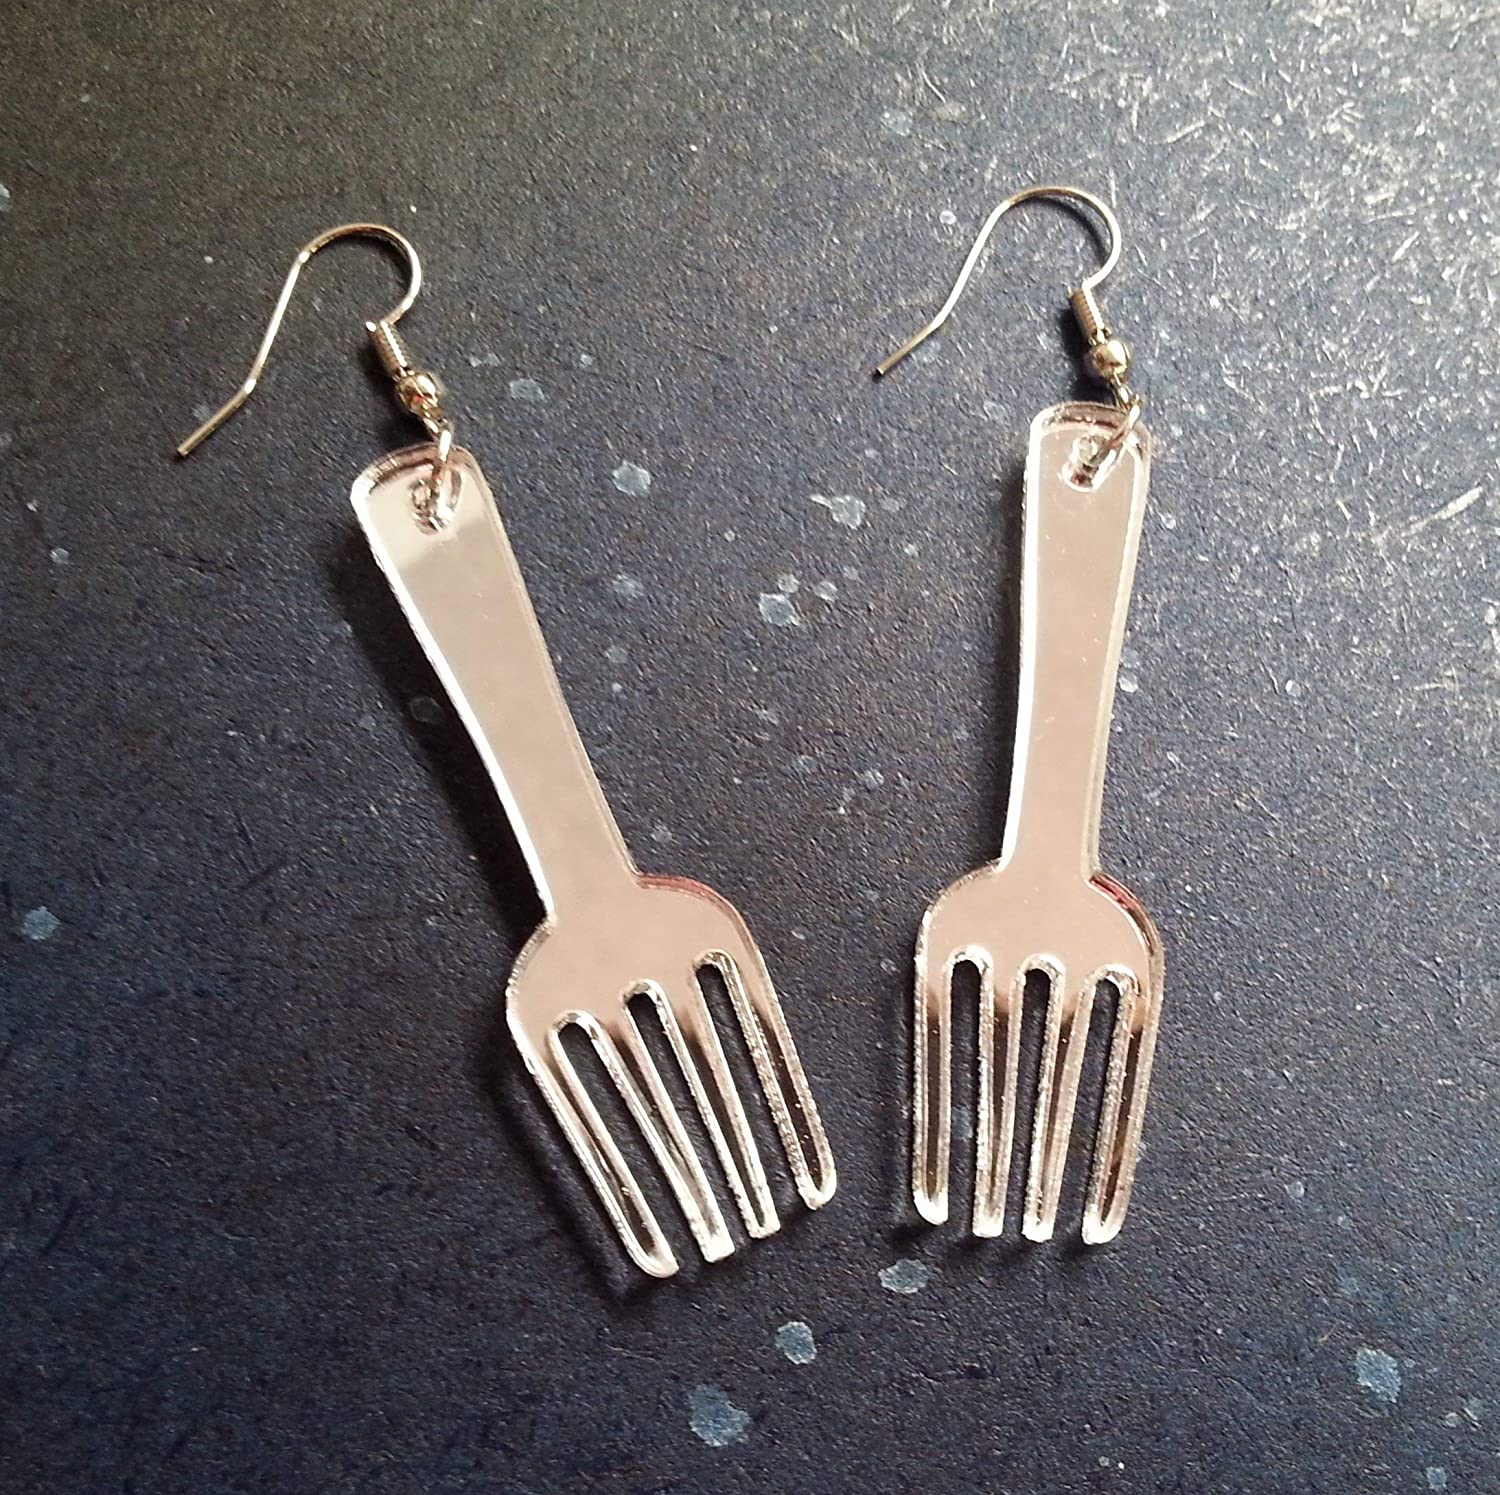 Unique Fork Dangle Statement Earrings with Nickel Free Hooks, Dinglehopper Mirrored Acrylic Funny Weird Earrings for Chefs, Servers and Cosplay